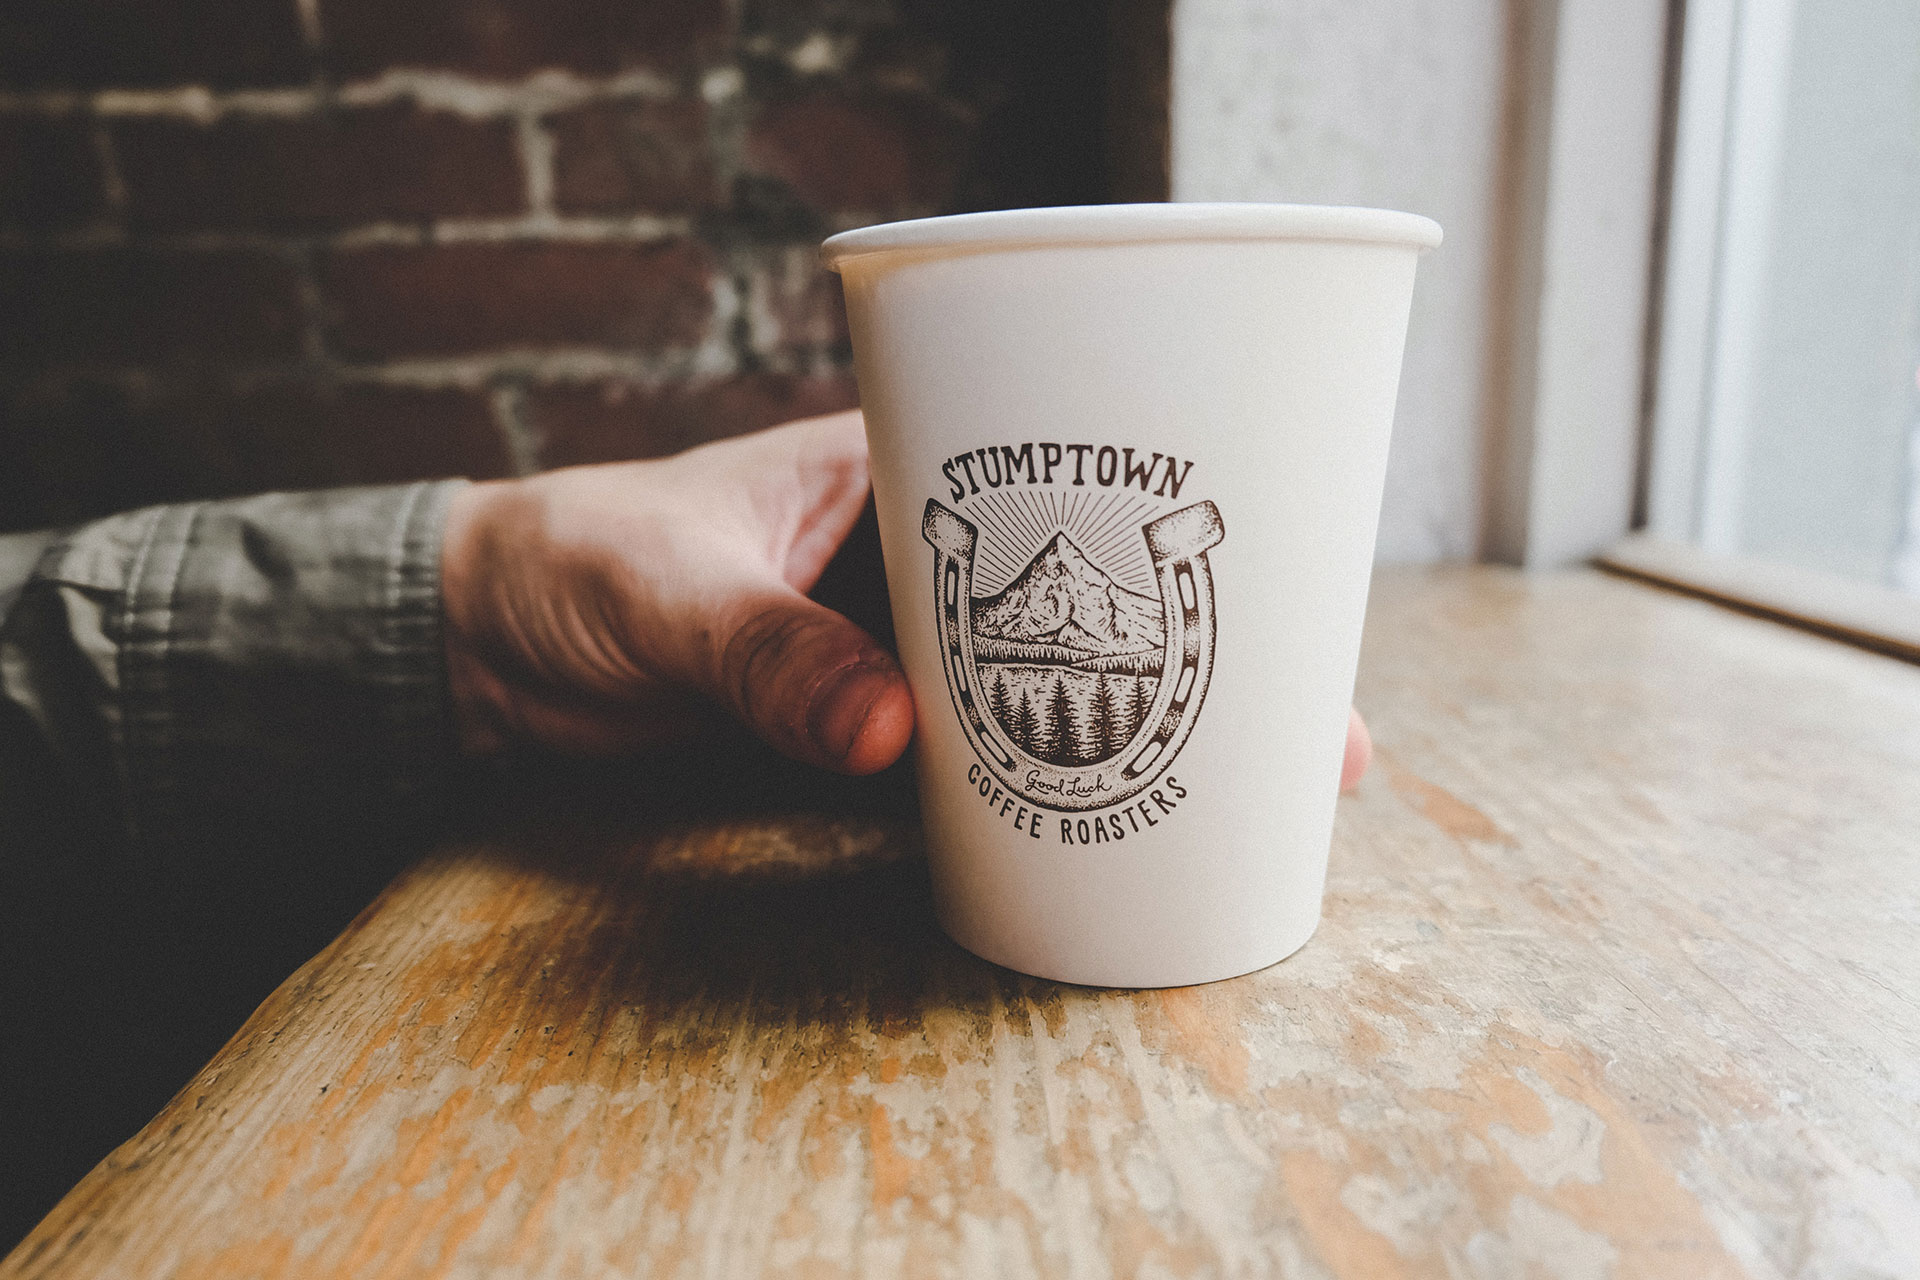 Cup of coffee with Stumptown logo